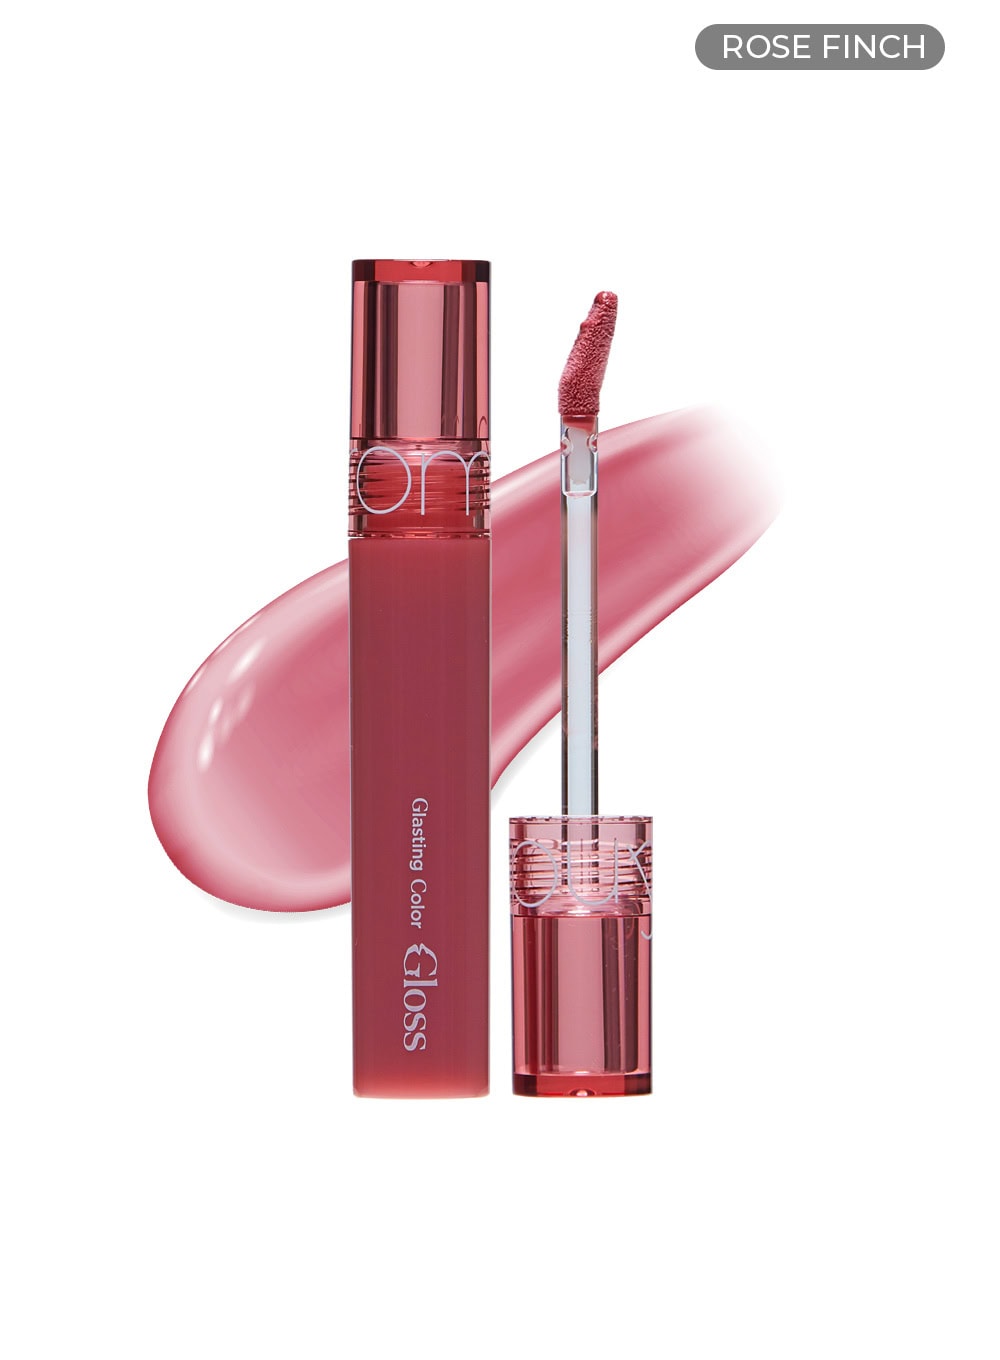 Glasting Color Gloss (4g) - 03 ROSE FINCH